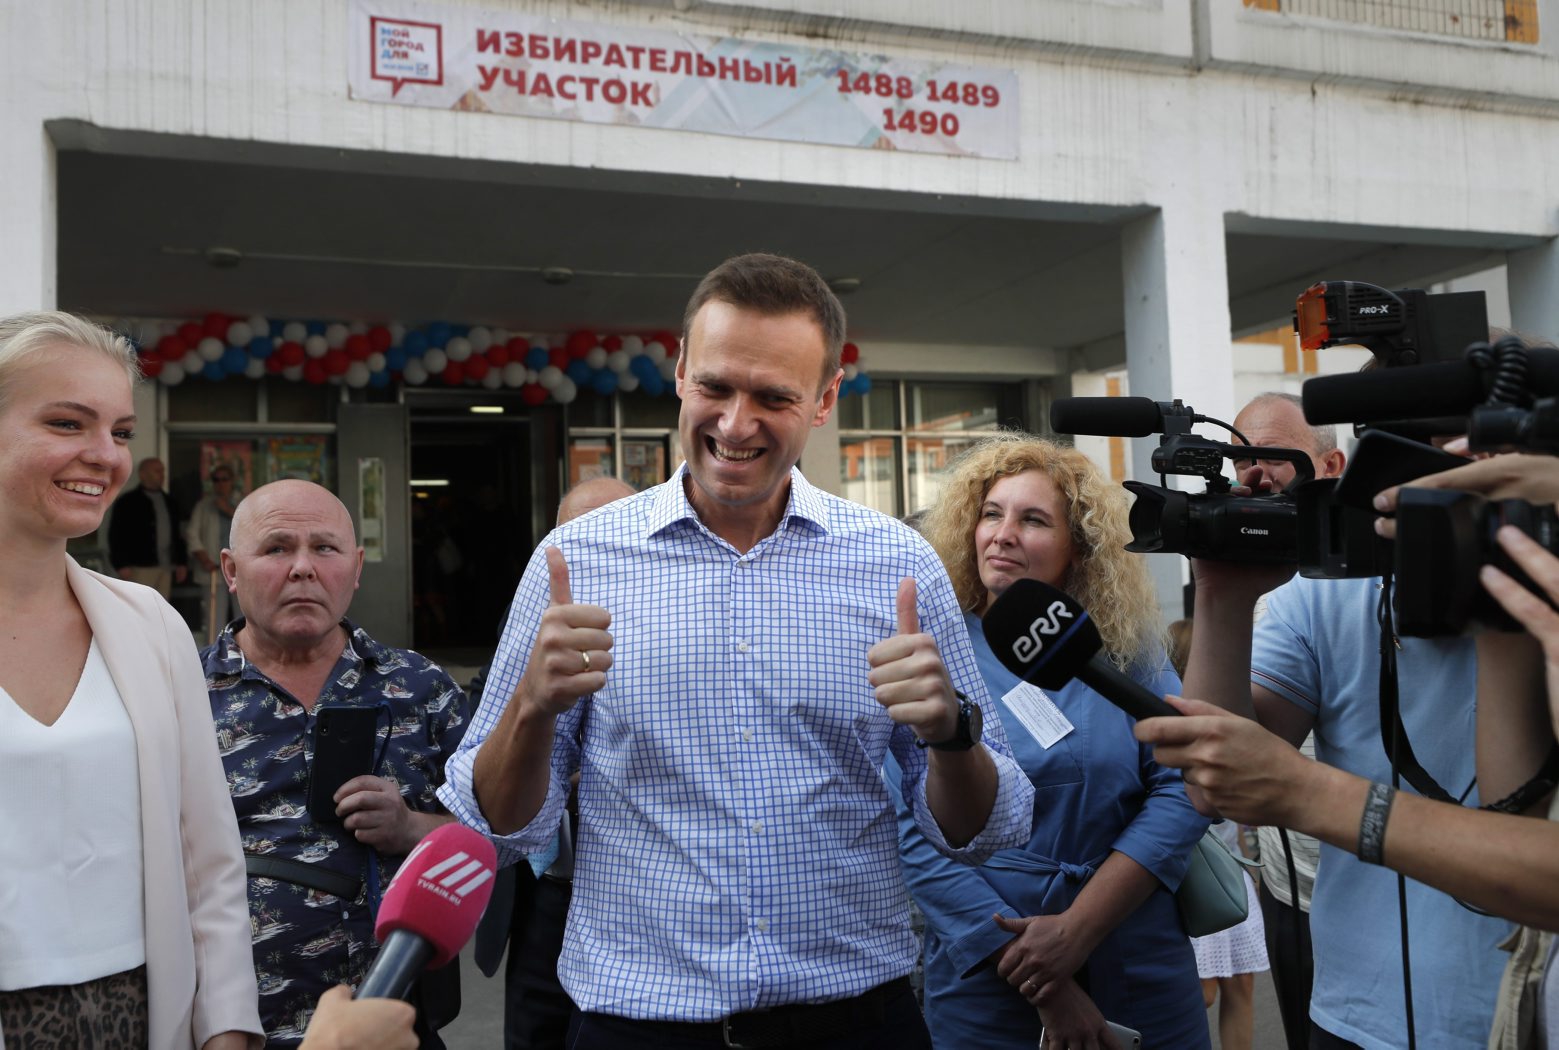 epa07827386 Russian opposition candidate Alexei Navalny reacts after voting in the Moscow City Duma elections in Moscow, Russia, 06 September 2019. The Moscow municipal elections have been dogged by controversy after several opposition candidates were barred from standing in the city elections.  EPA/YURI KOCHETKOV RUSSIA ELECTIONS